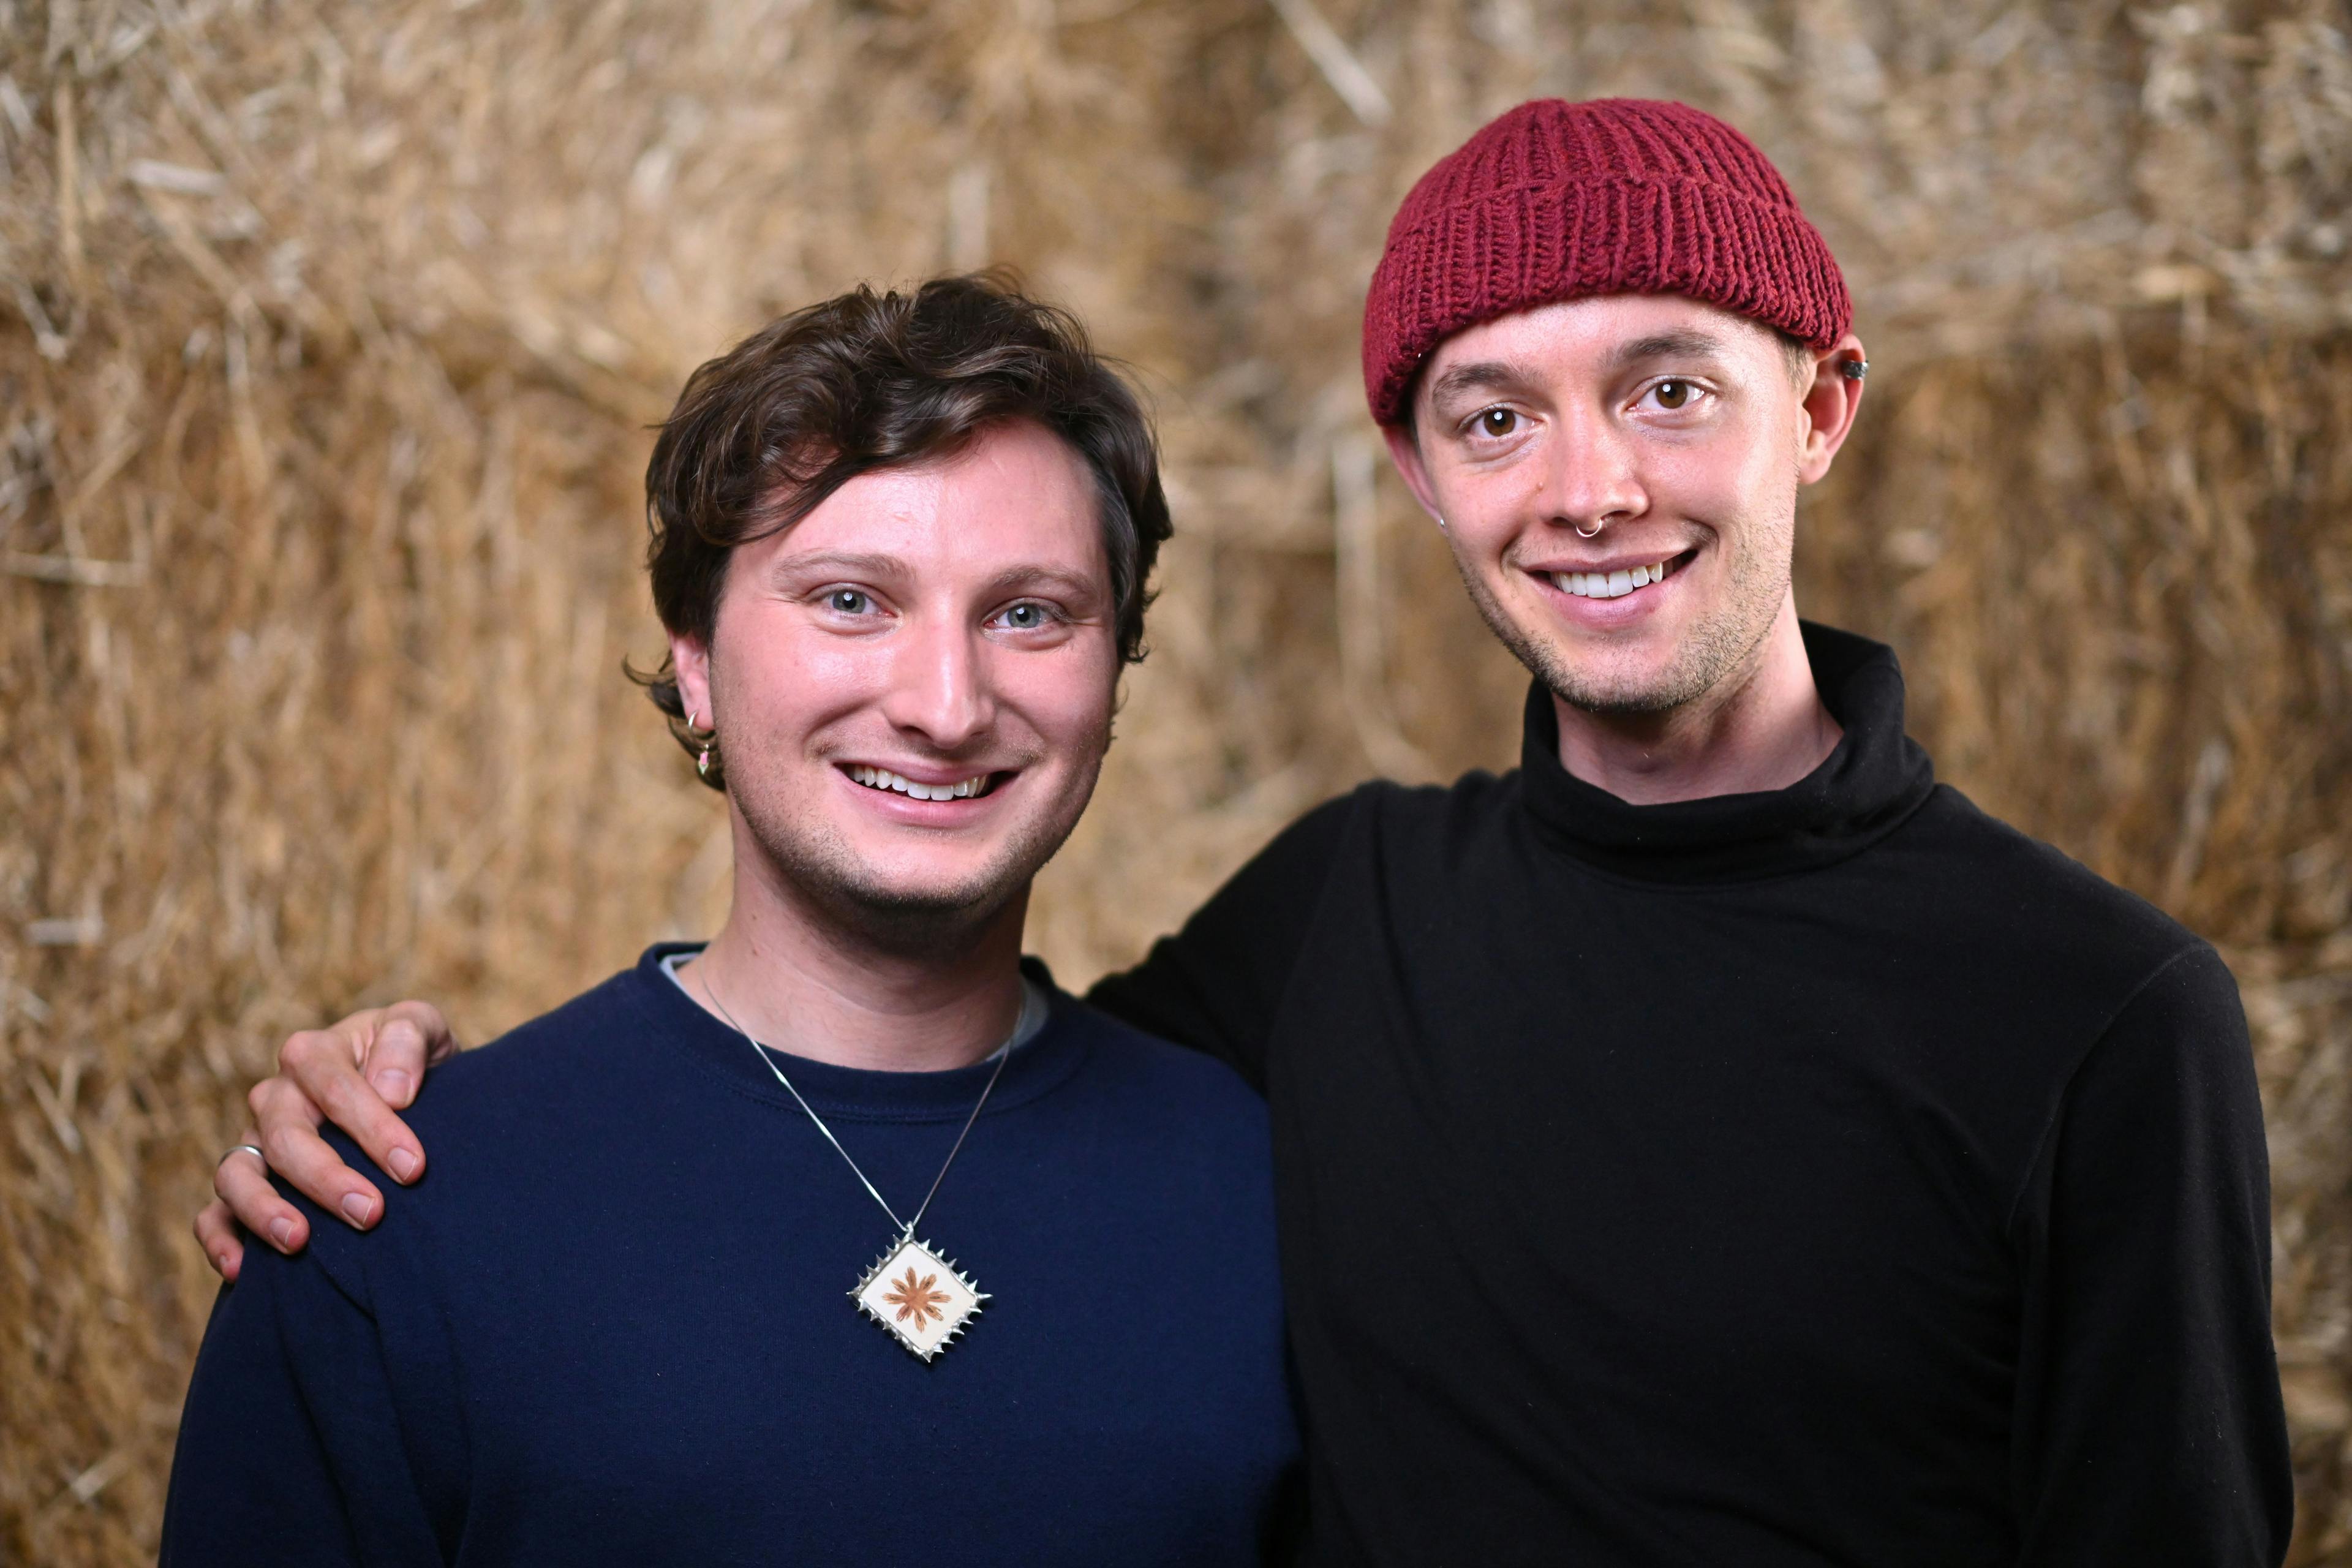 Two young white men smile in front of a blurry background resembling hay. One has wavy brown hair and wears a navy blue shirt and necklace, and the other wears a black turtleneck, red beanie, and a septum piercing.